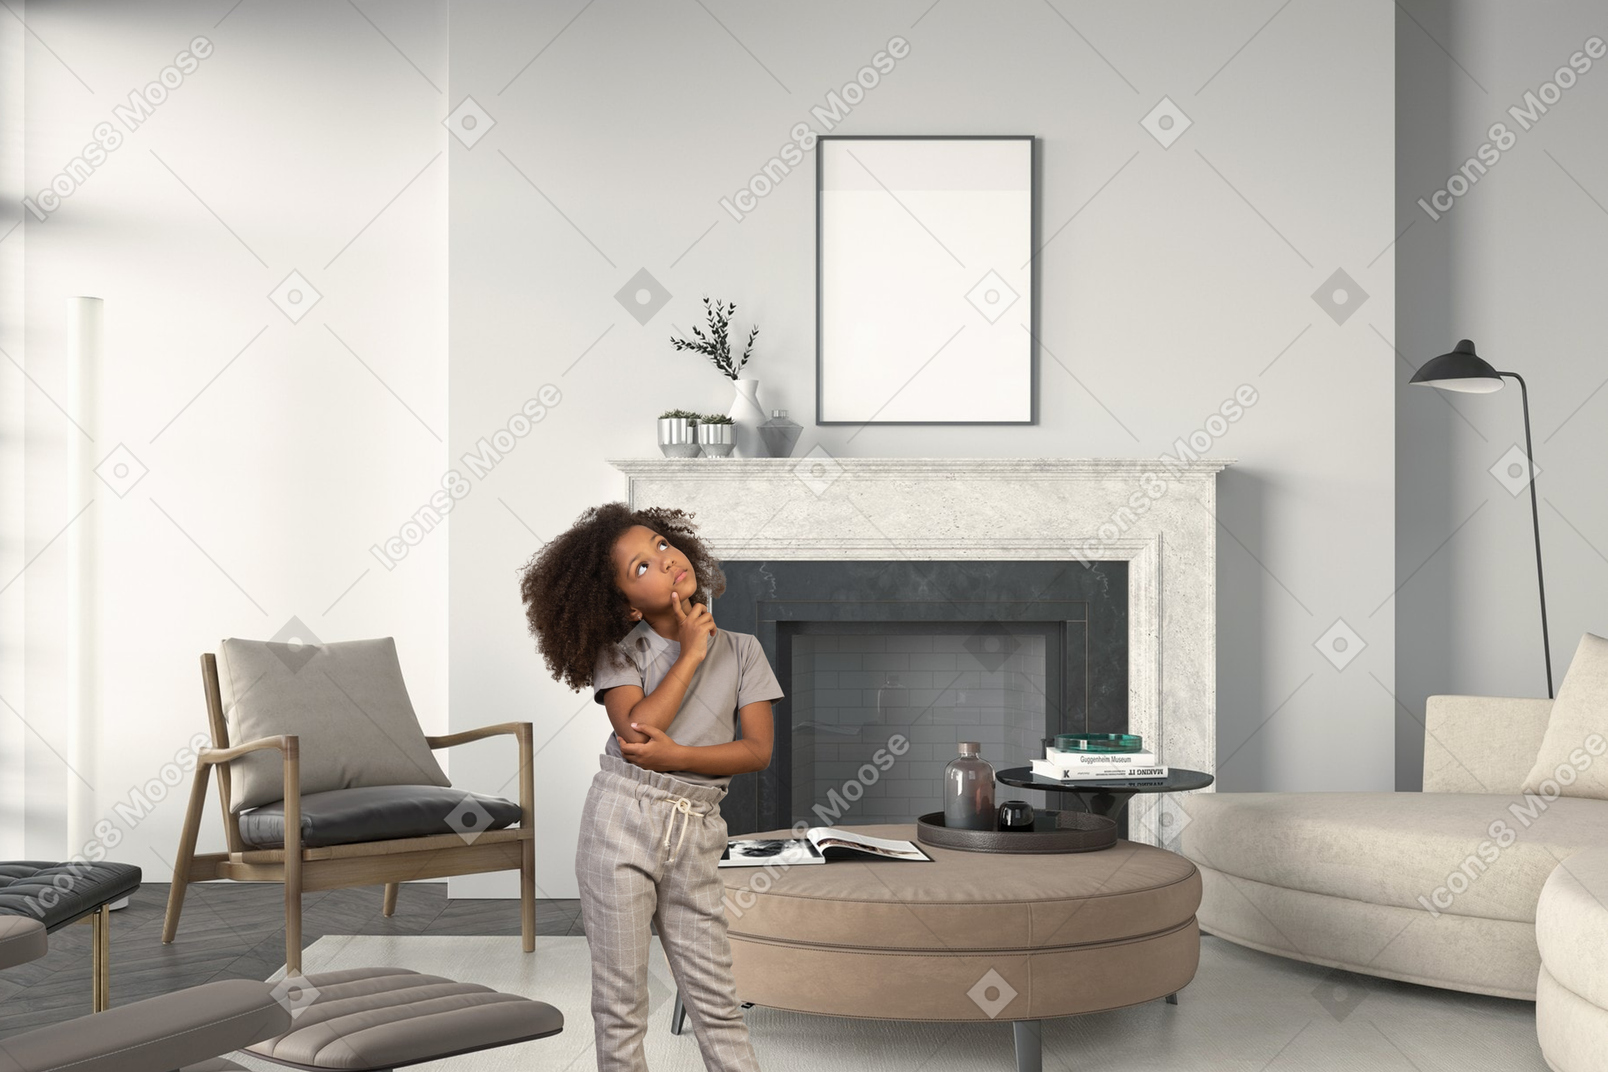 A young girl standing in front of a fireplace in a living room